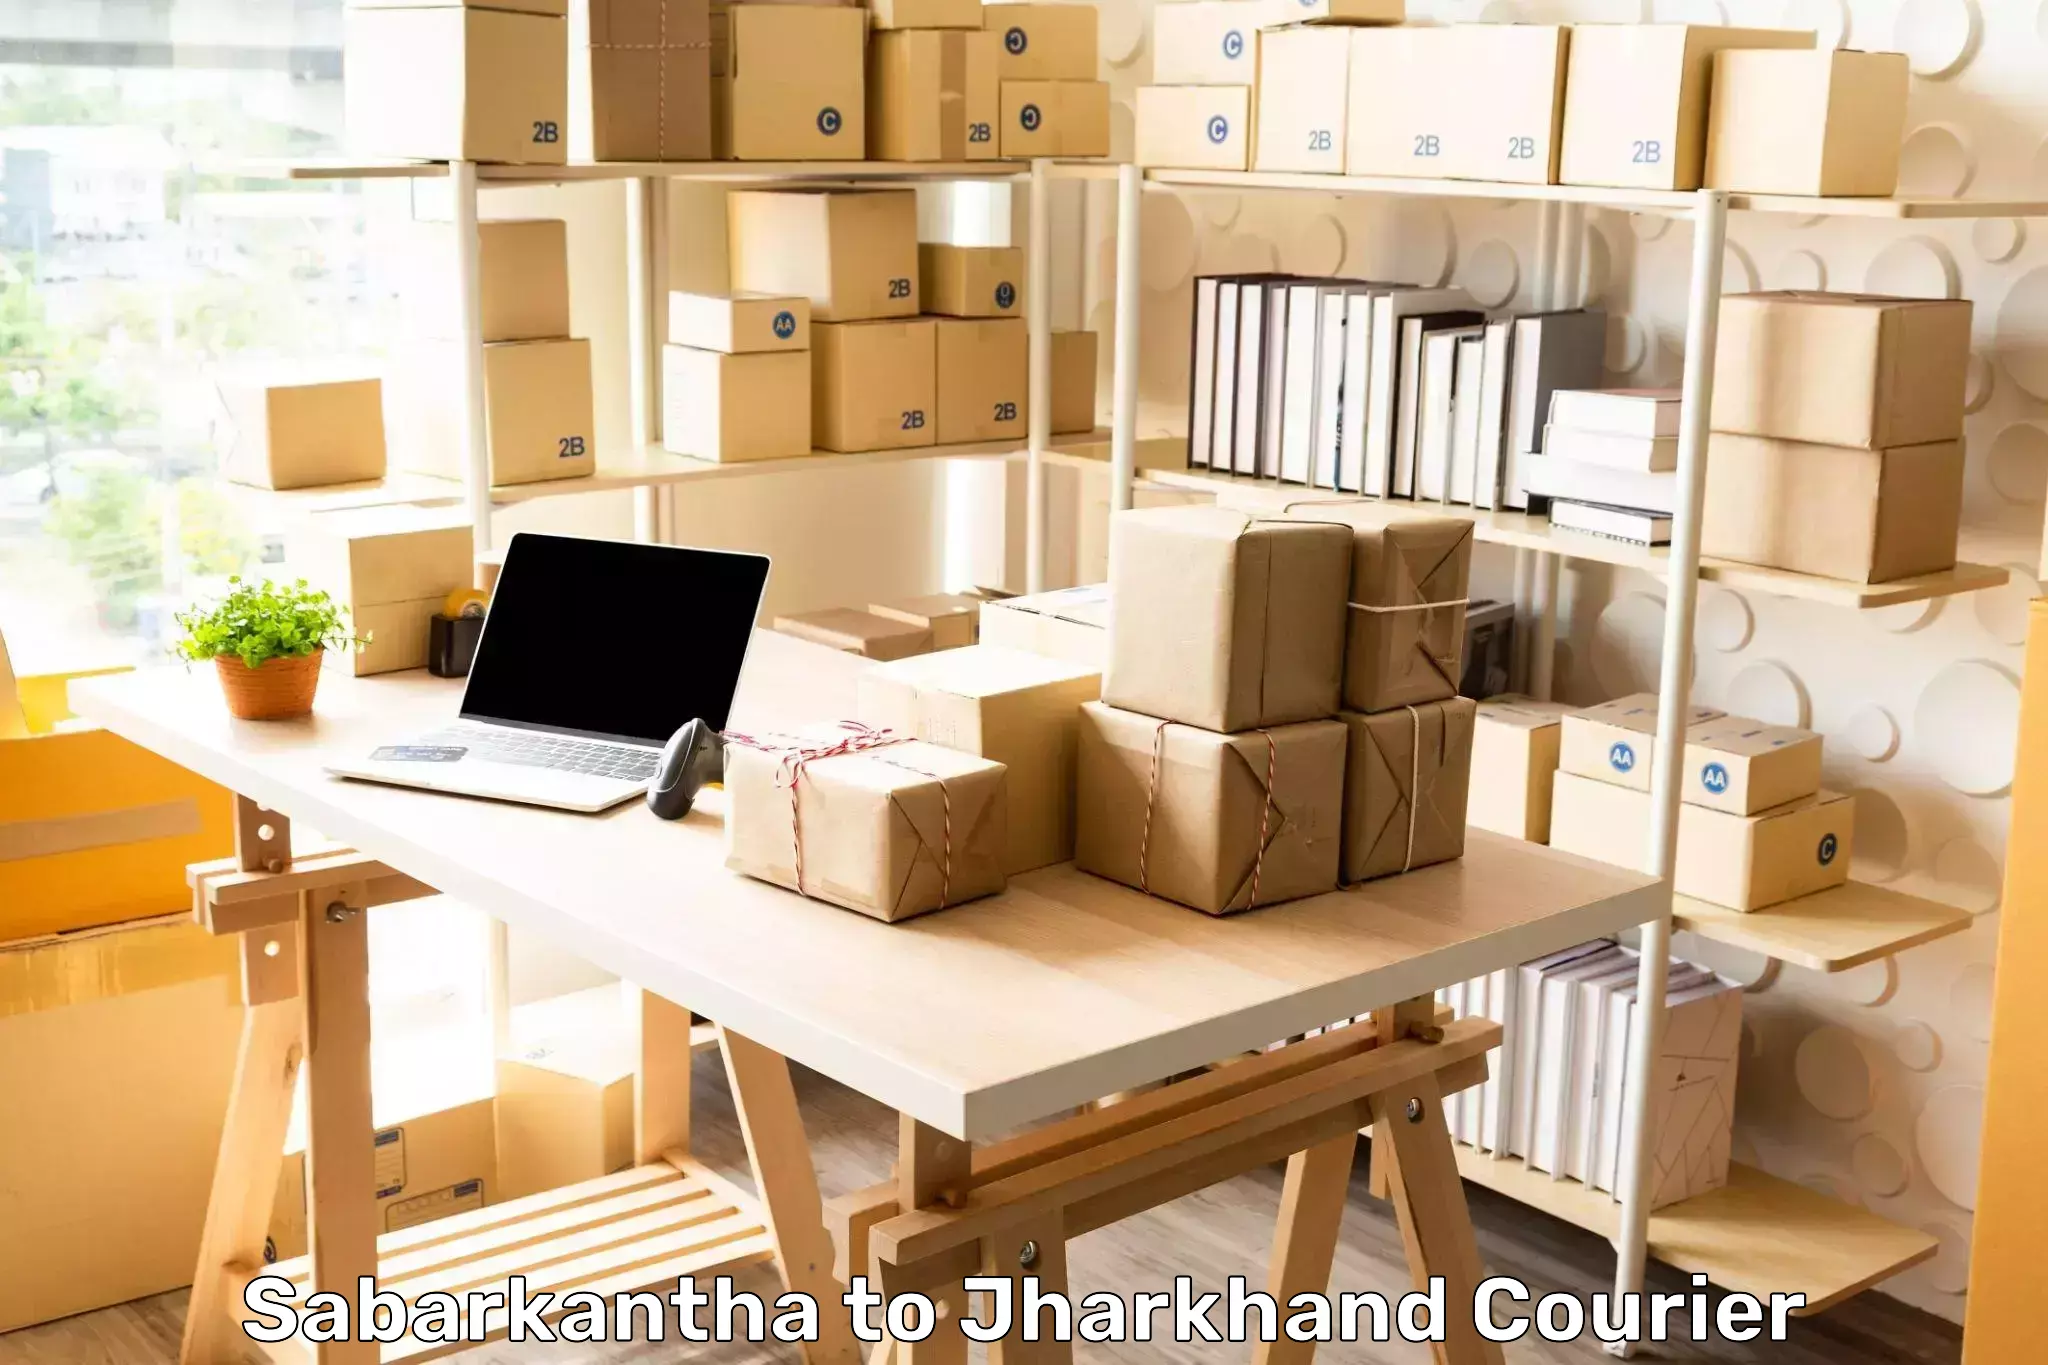 Business delivery service in Sabarkantha to IIT Dhanbad